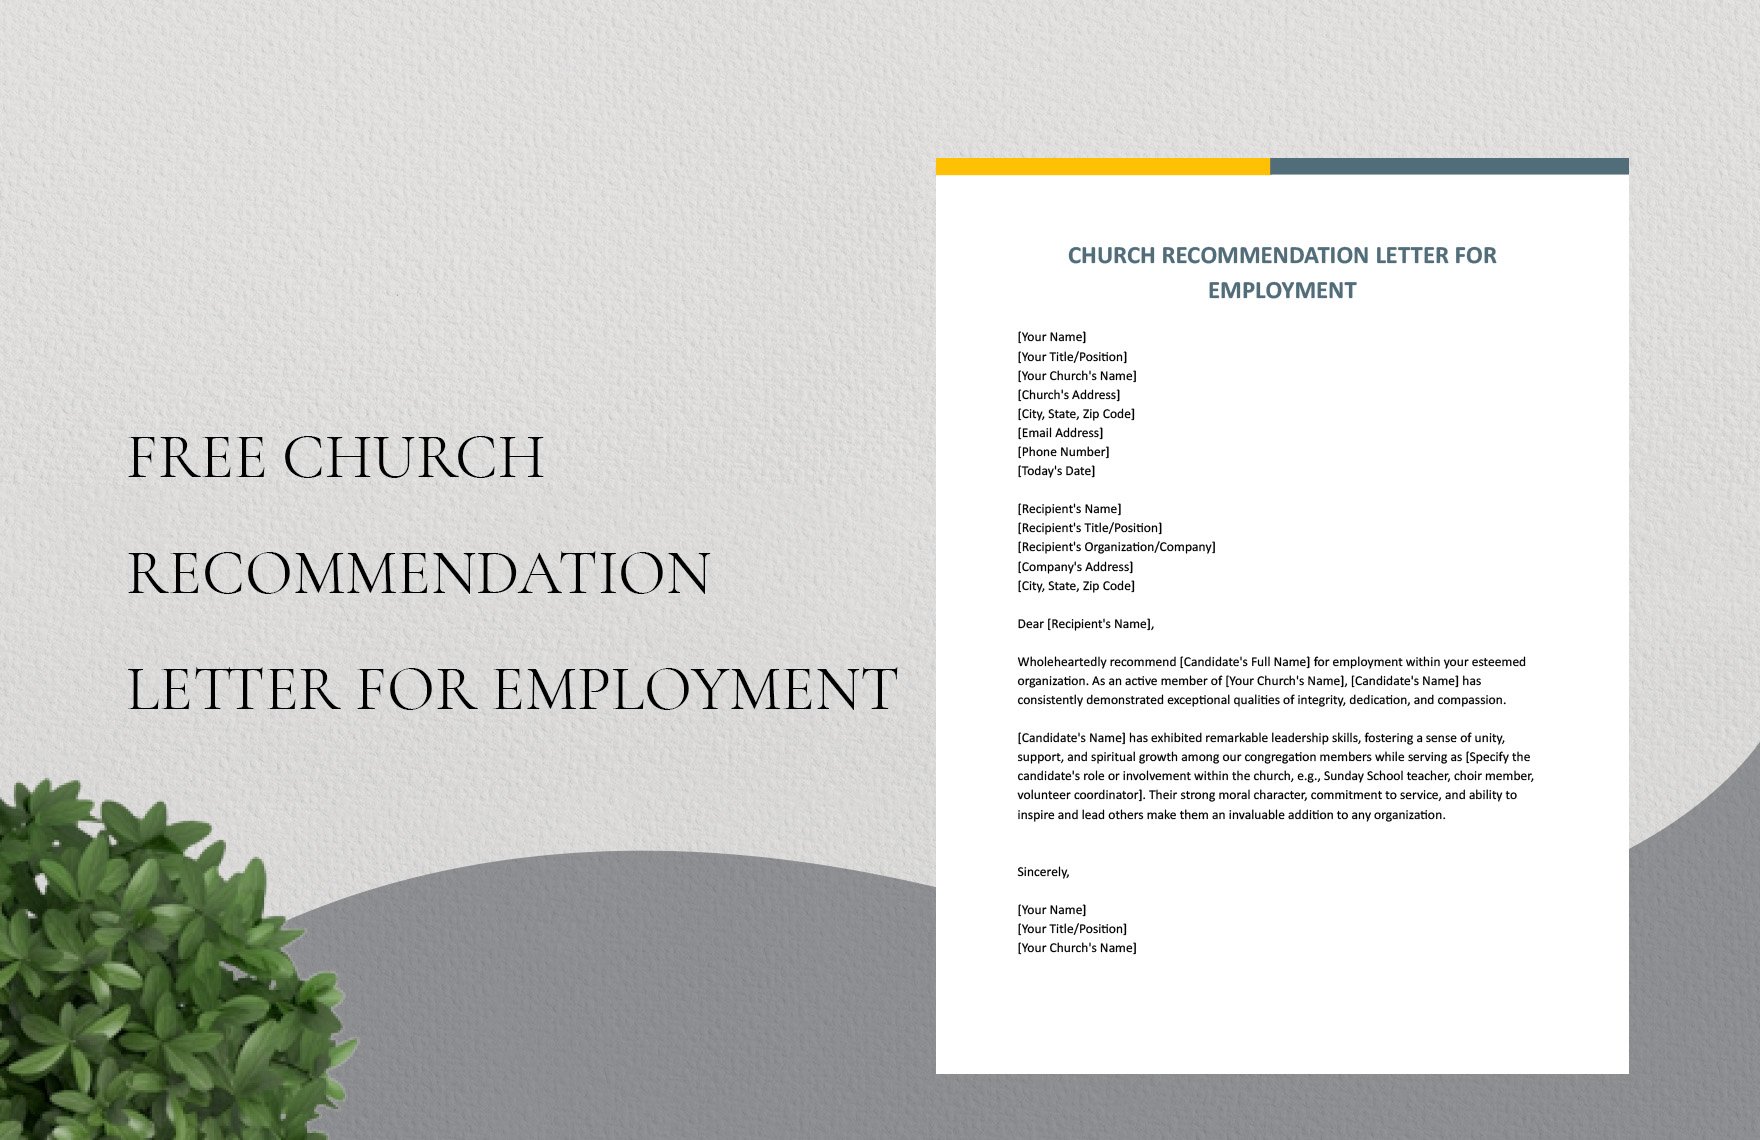 Free Church Recommendation Letter For Employment